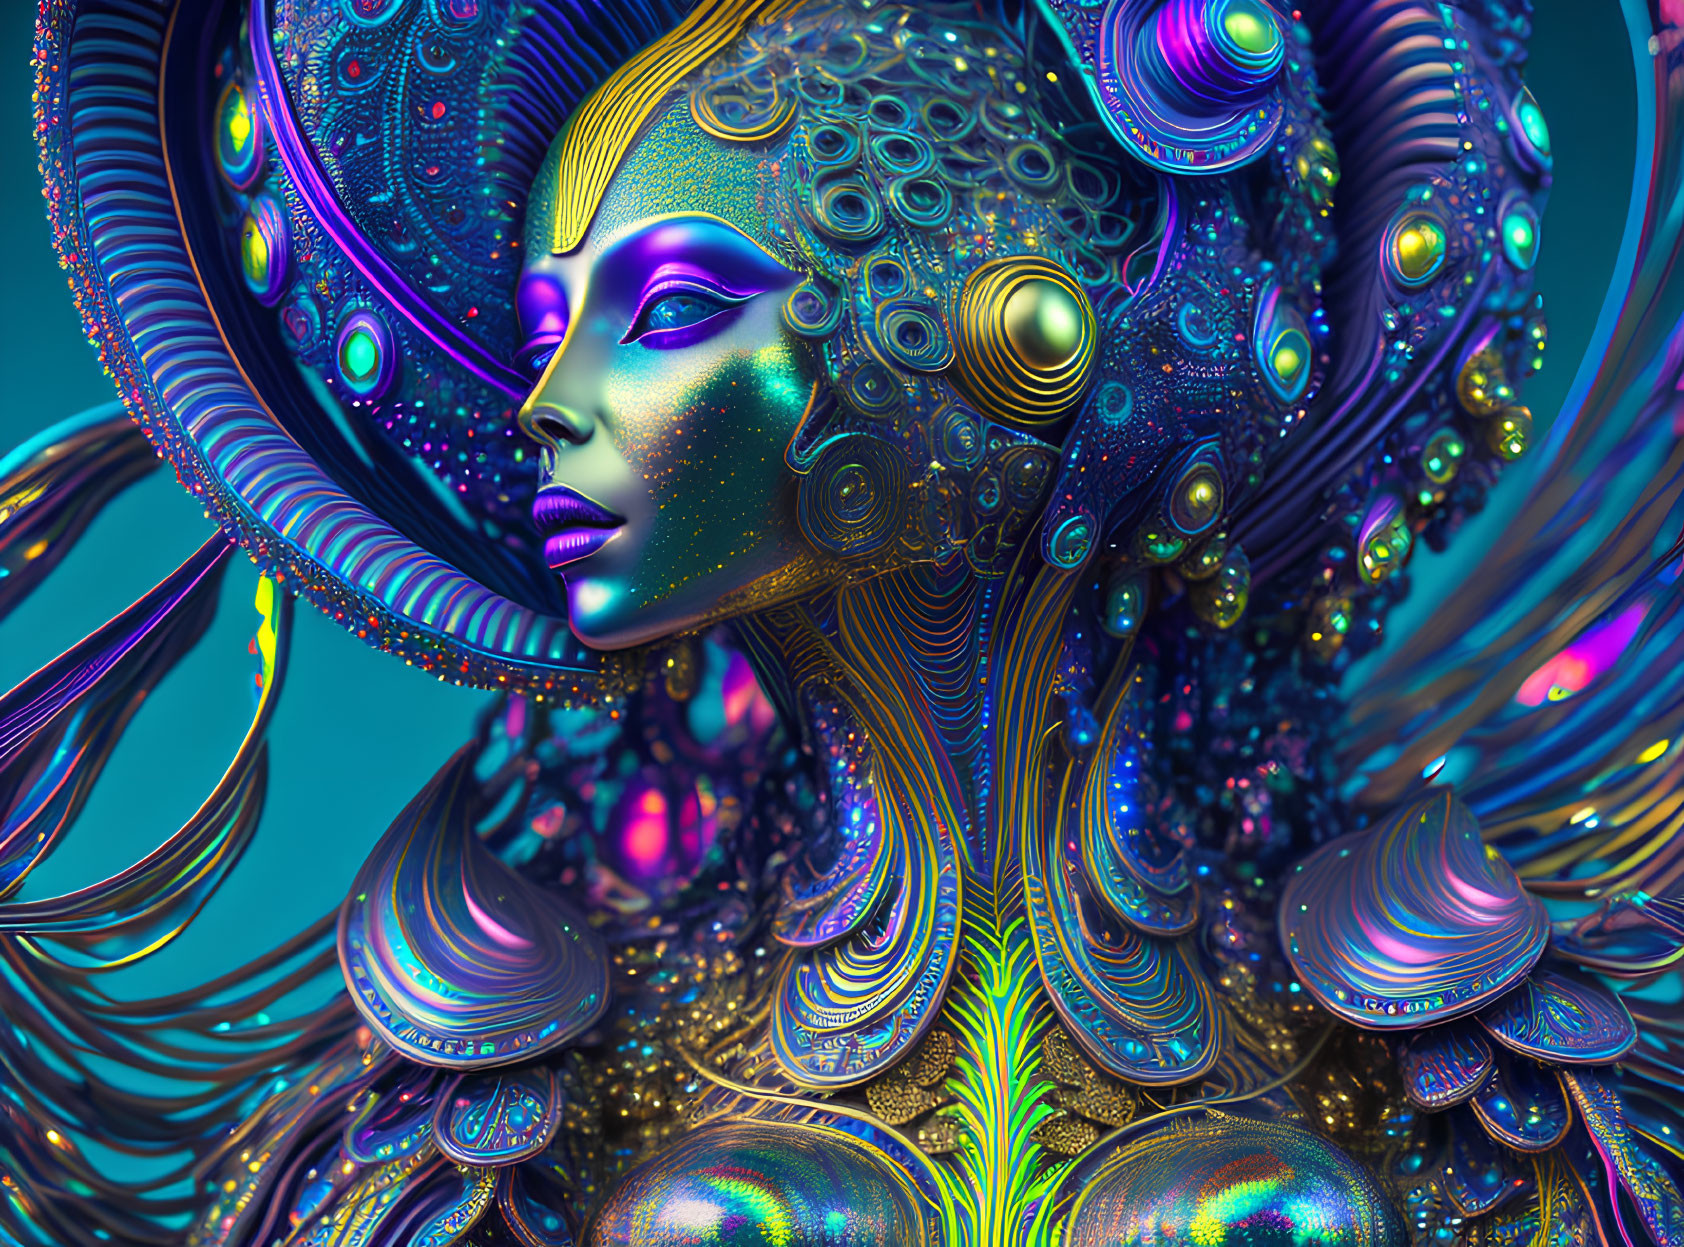 Colorful digital artwork of stylized woman with metallic adornments